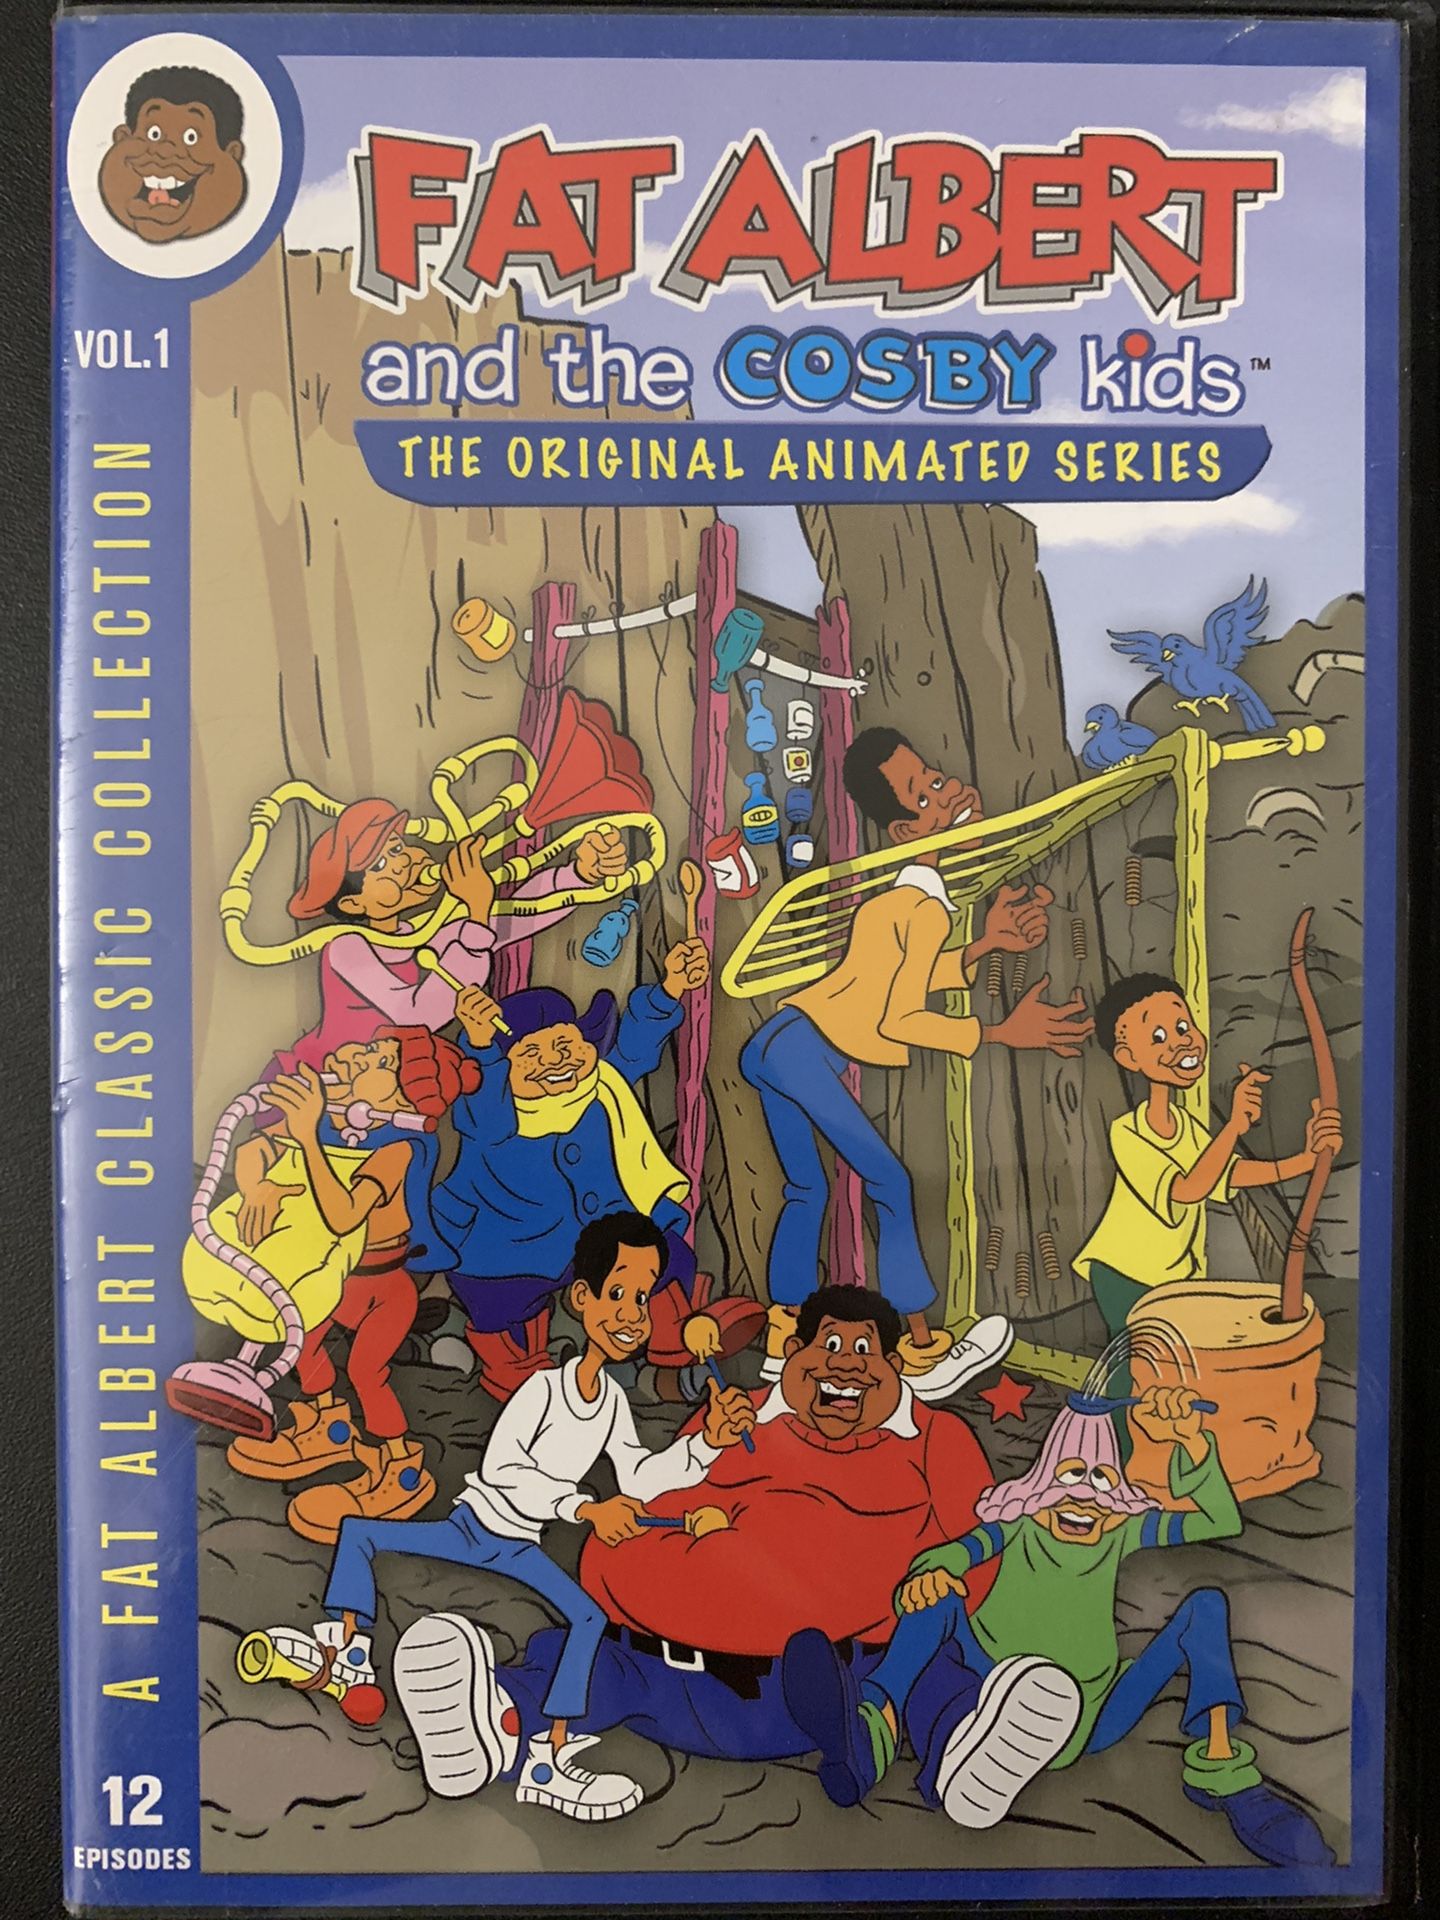 FAT ALBERT And The COSBY KIDS The Original Animated Series Volume 1 (DVD)